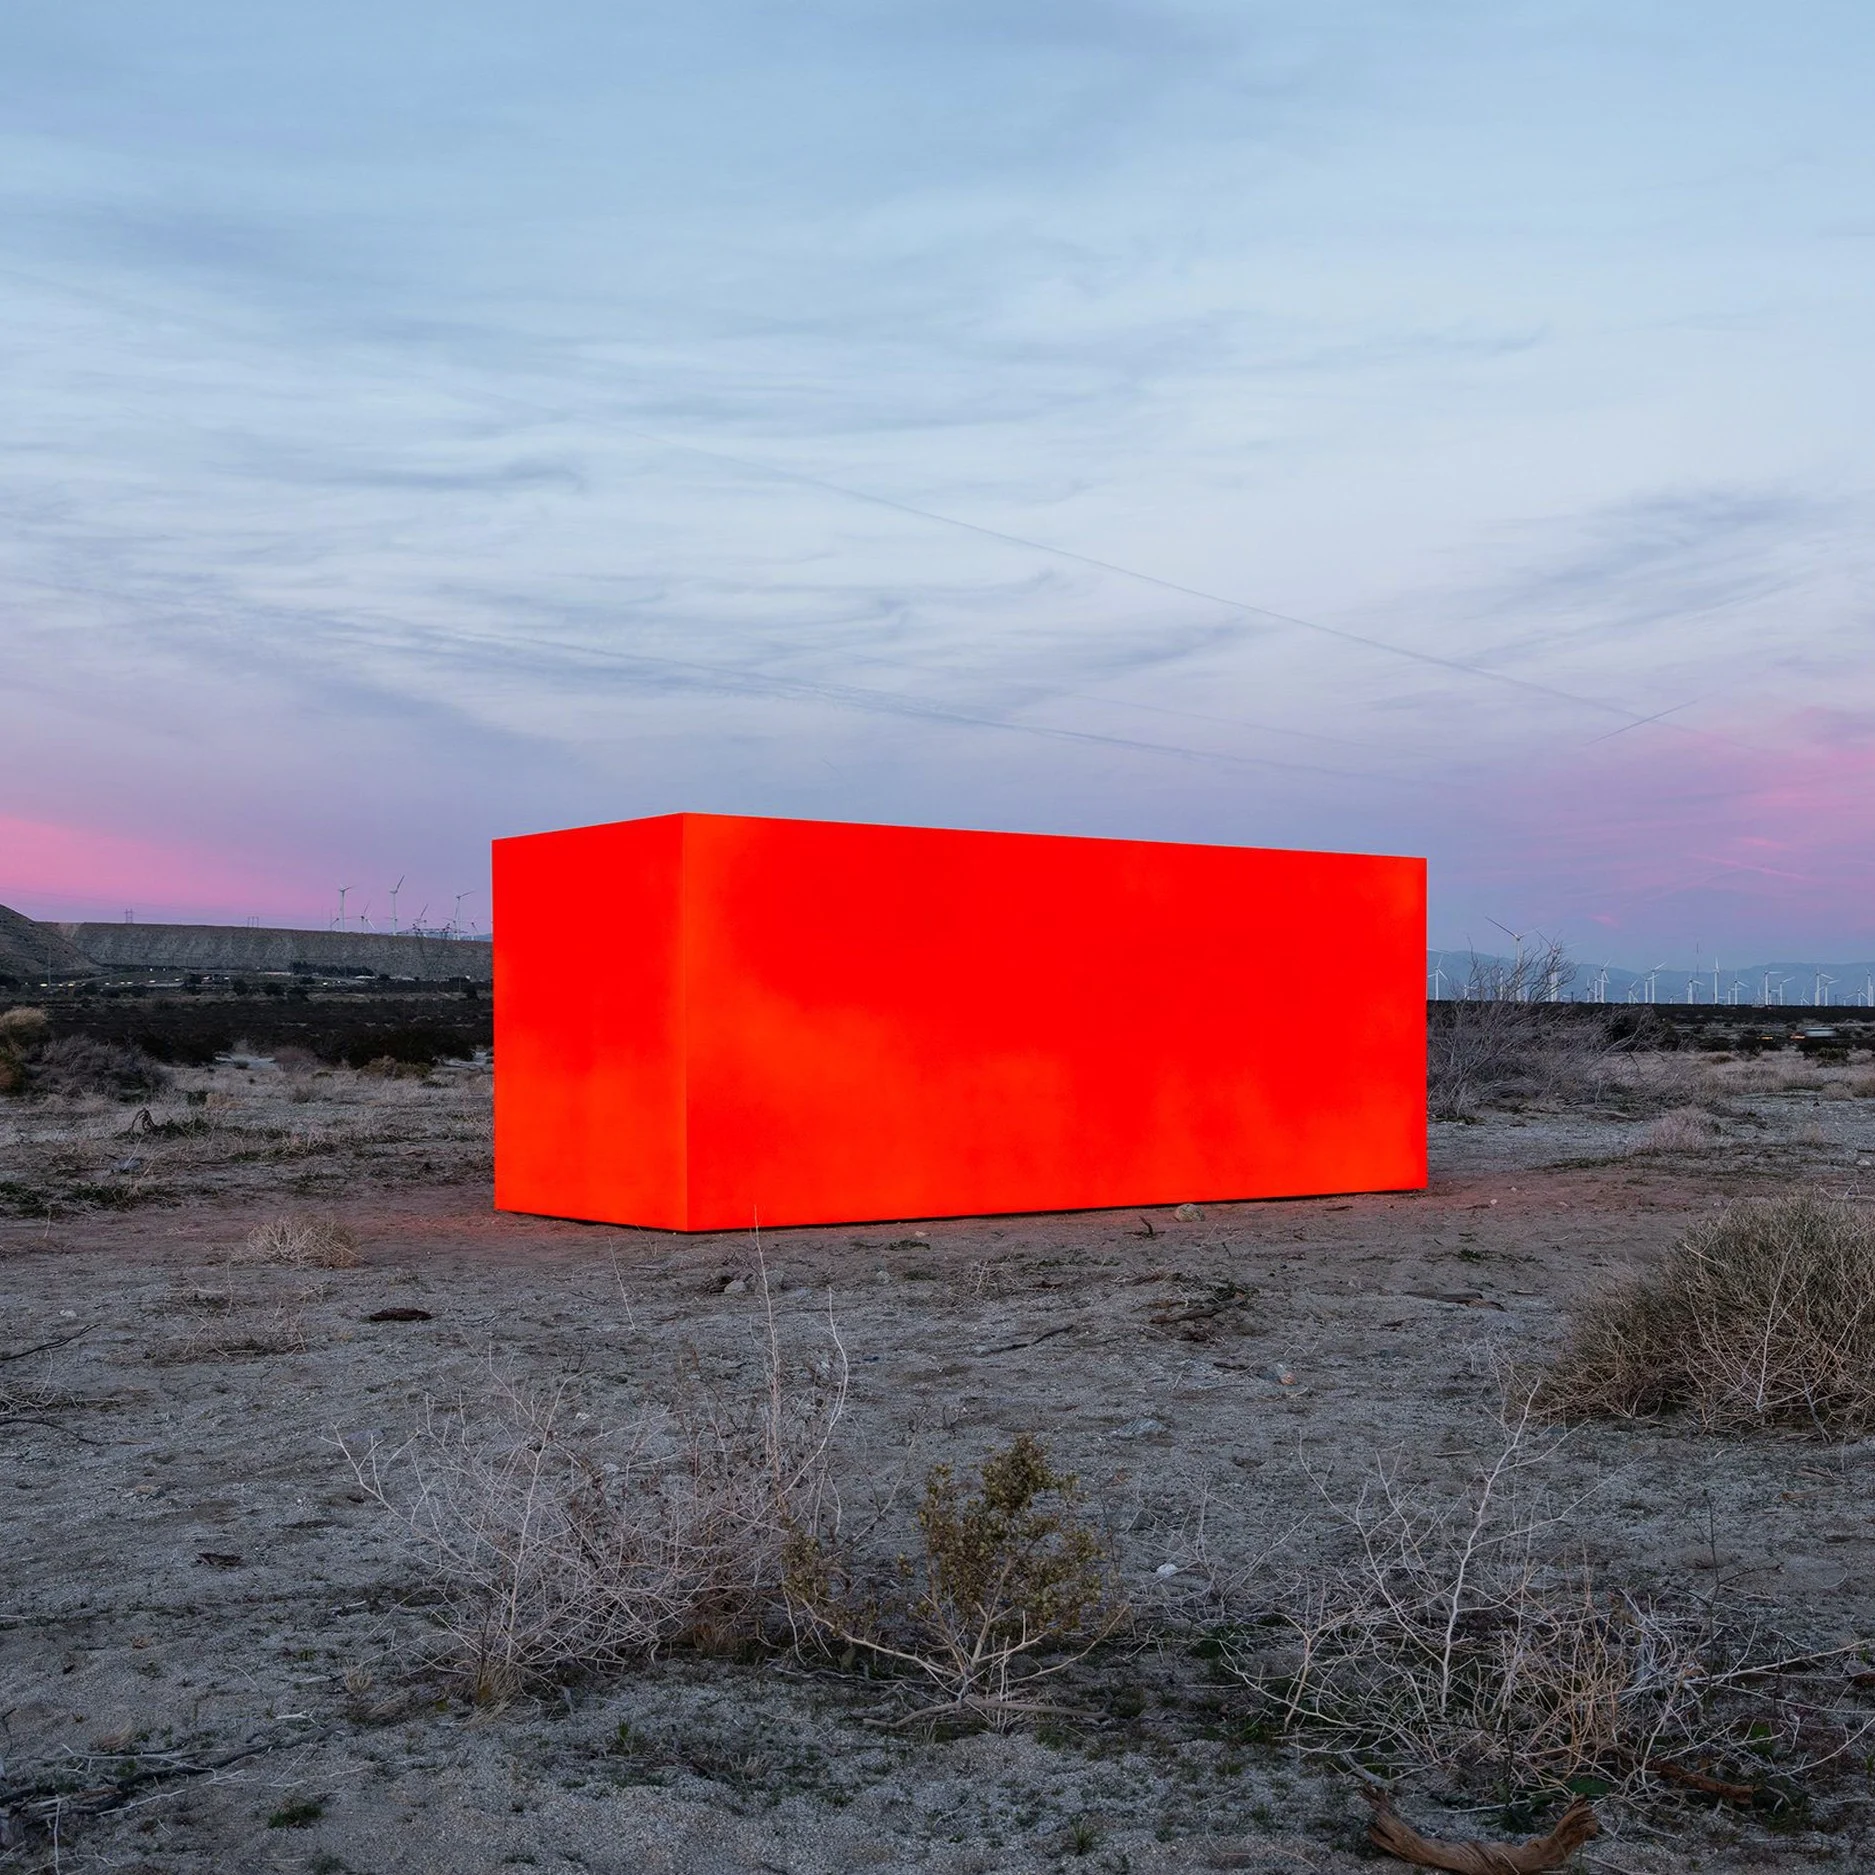 Sterling Ruby, SPECTER, 2019. Courtesy of Sterling Ruby and Desert X. Photo © Lance Gerber.